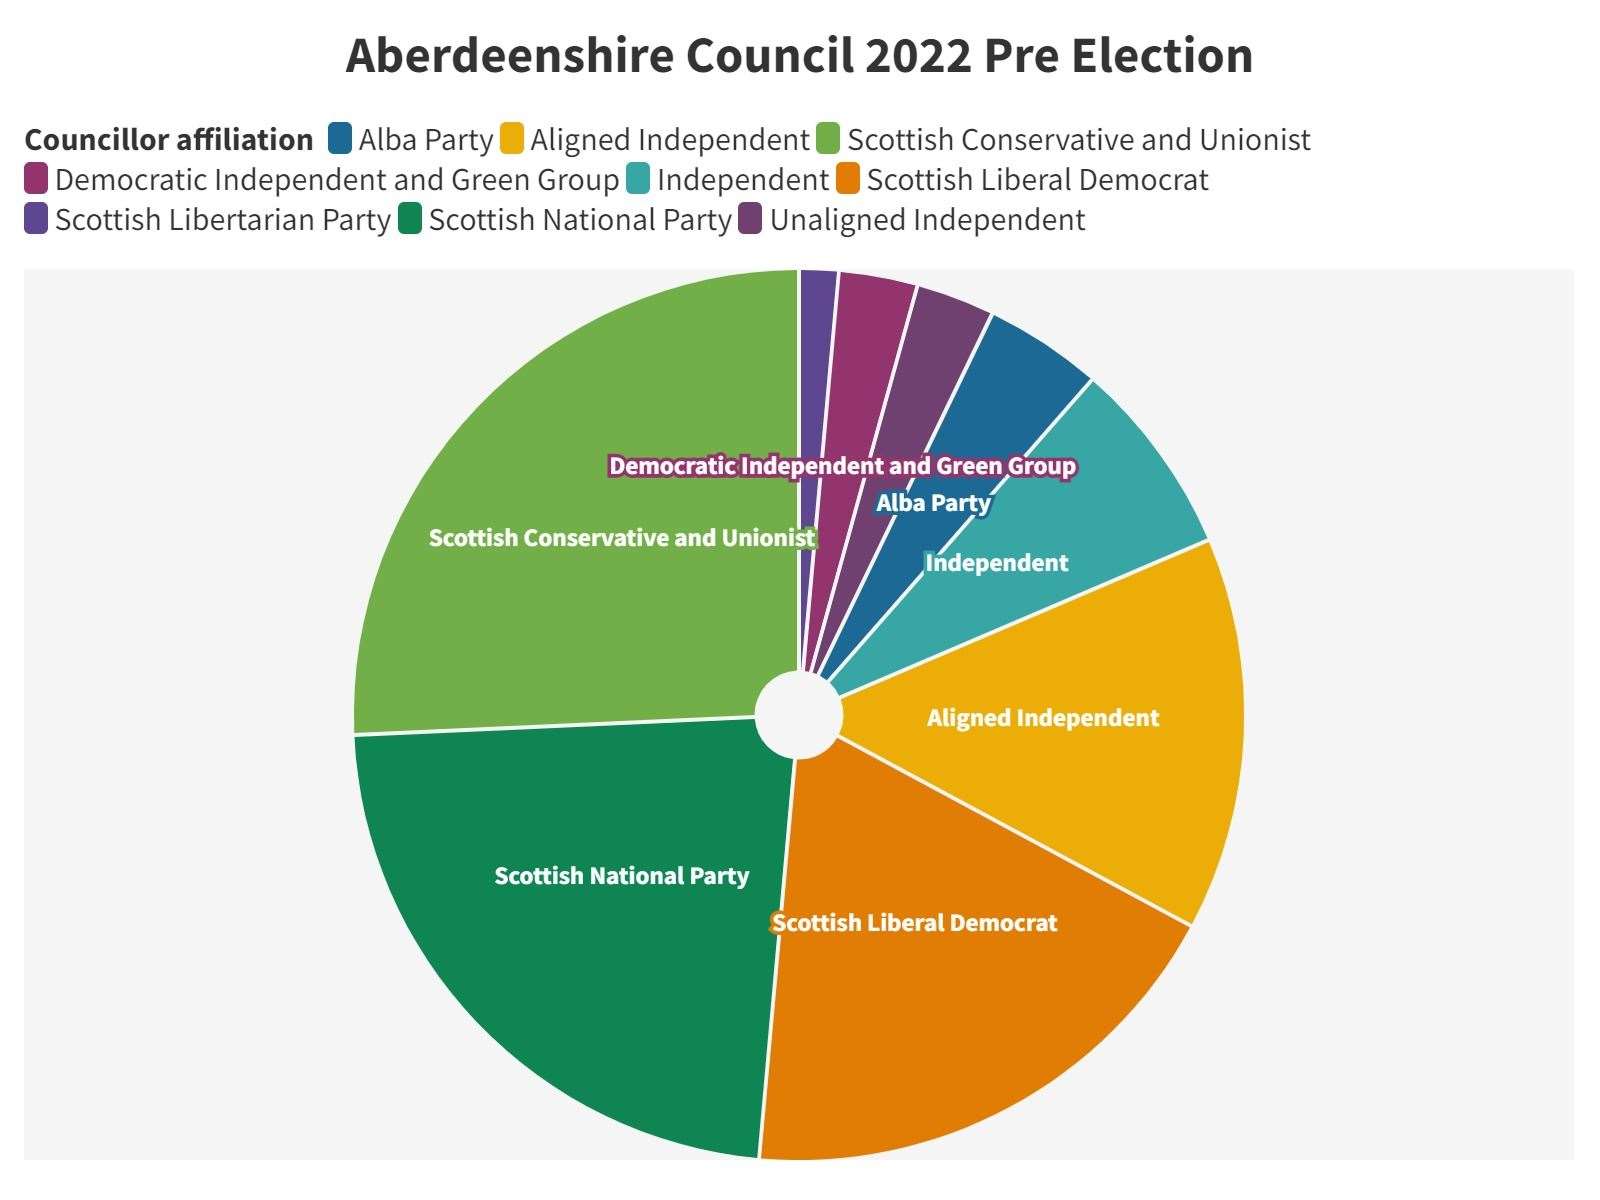 The currnet political make-up of Aberdeenshire Council